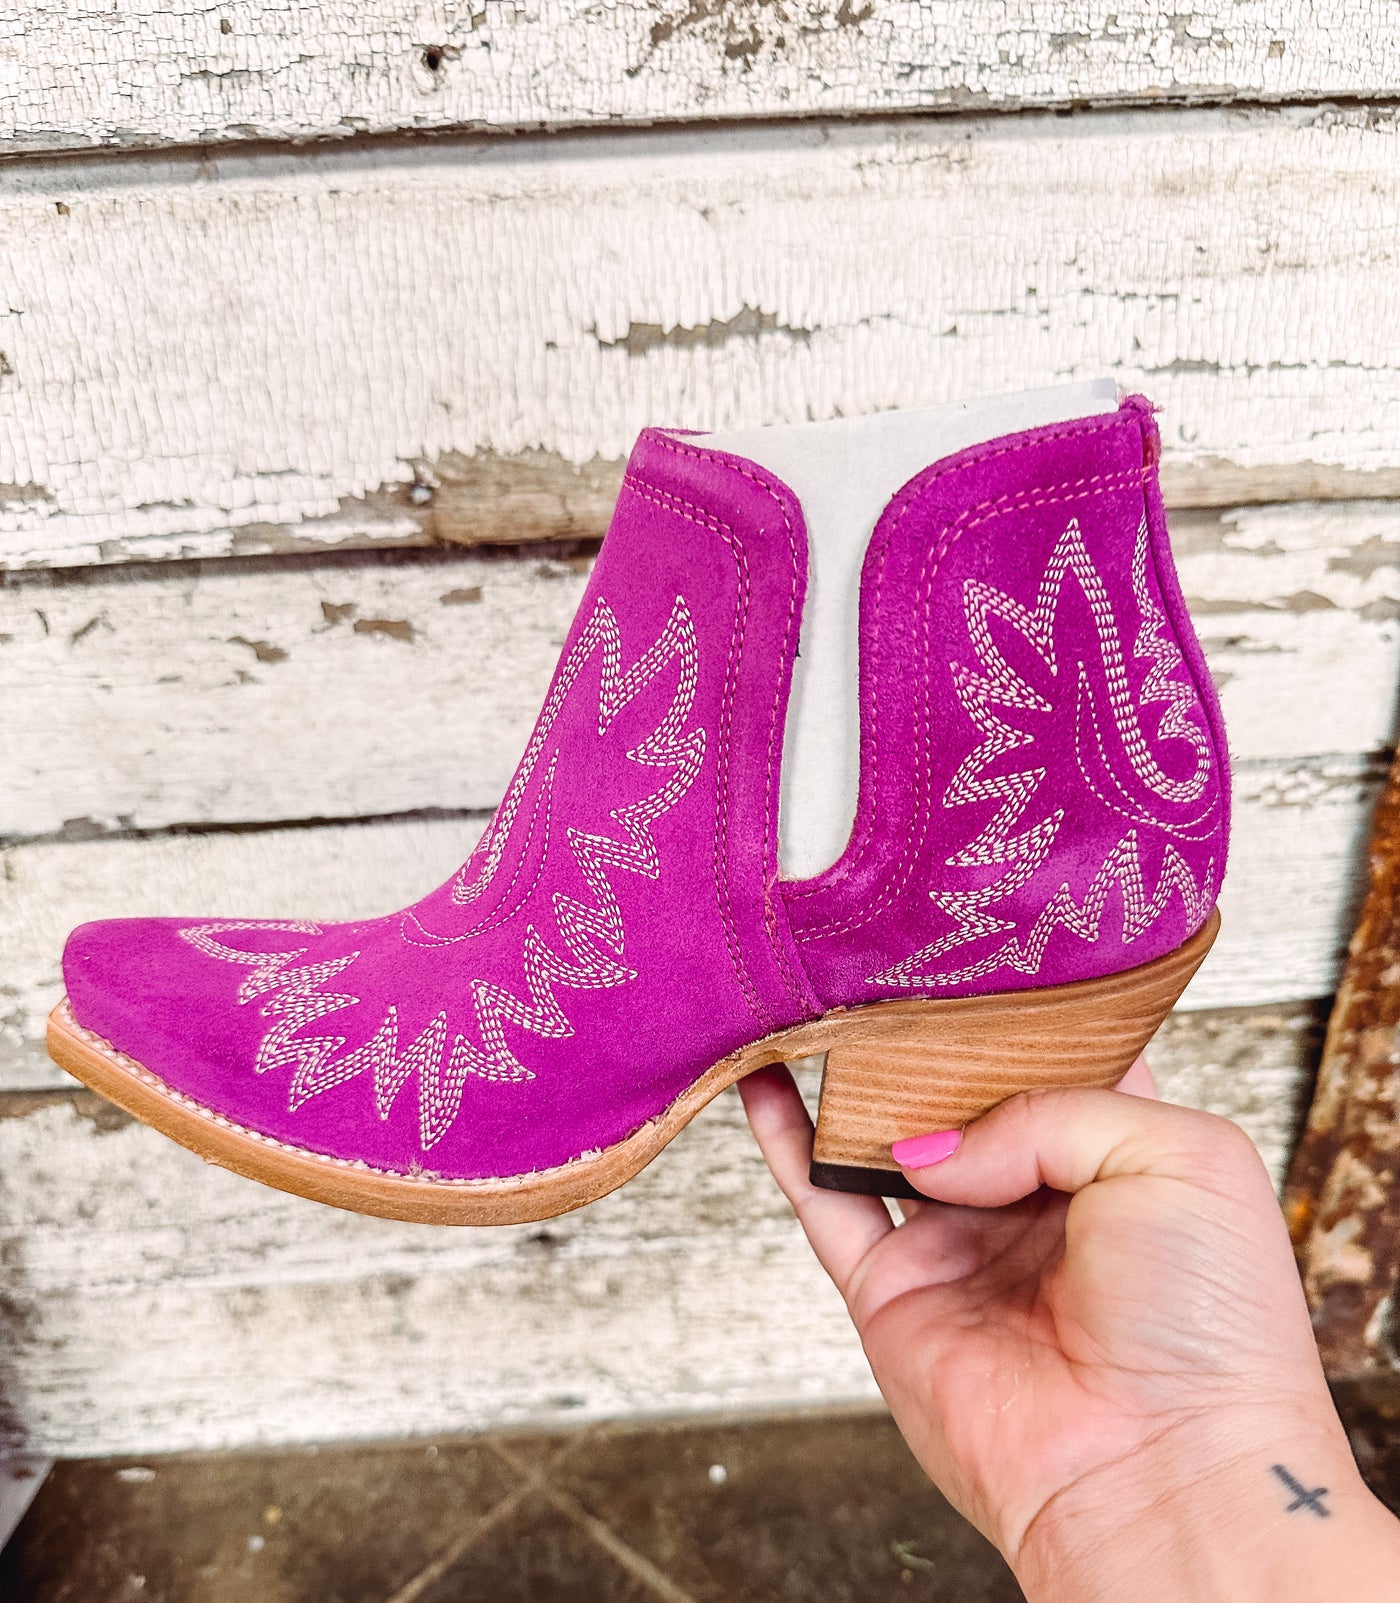 Haute Pink Suede - Ariat Dixon - 6.5 left-301 BOOTS-Ariat-Adelyn Elaine's Boutique, Women's Clothing Boutique in Gilmer, TX